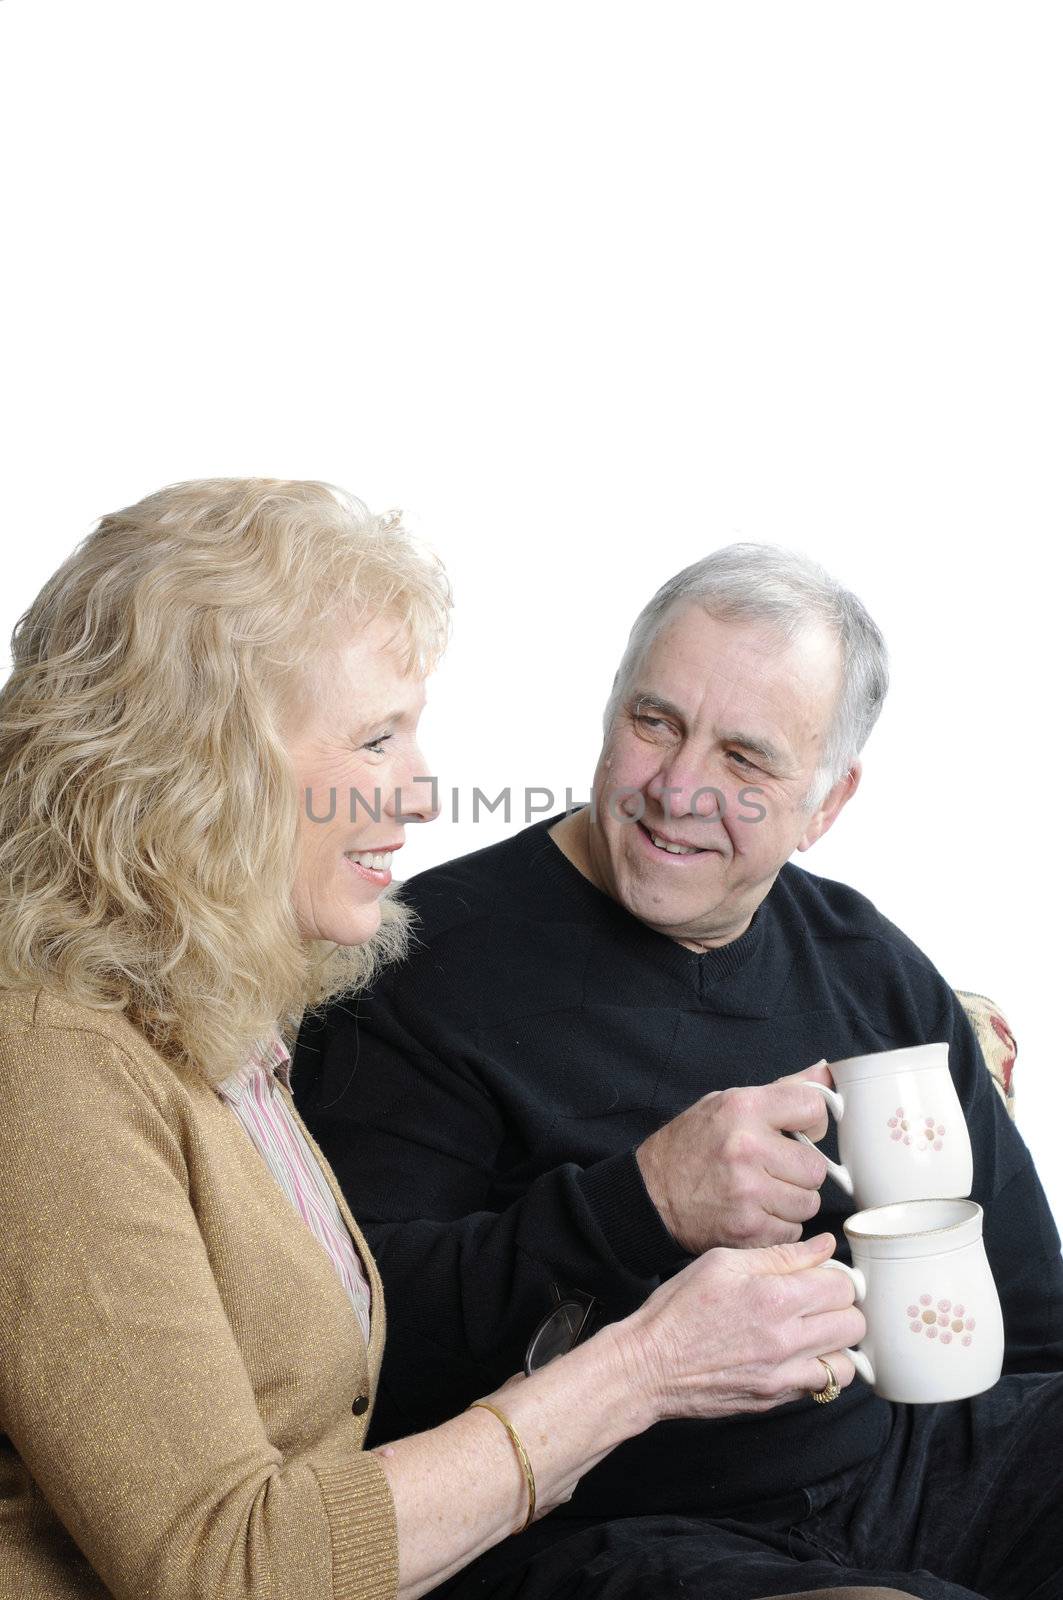 Older enjoying a cup of coffee together over a white background